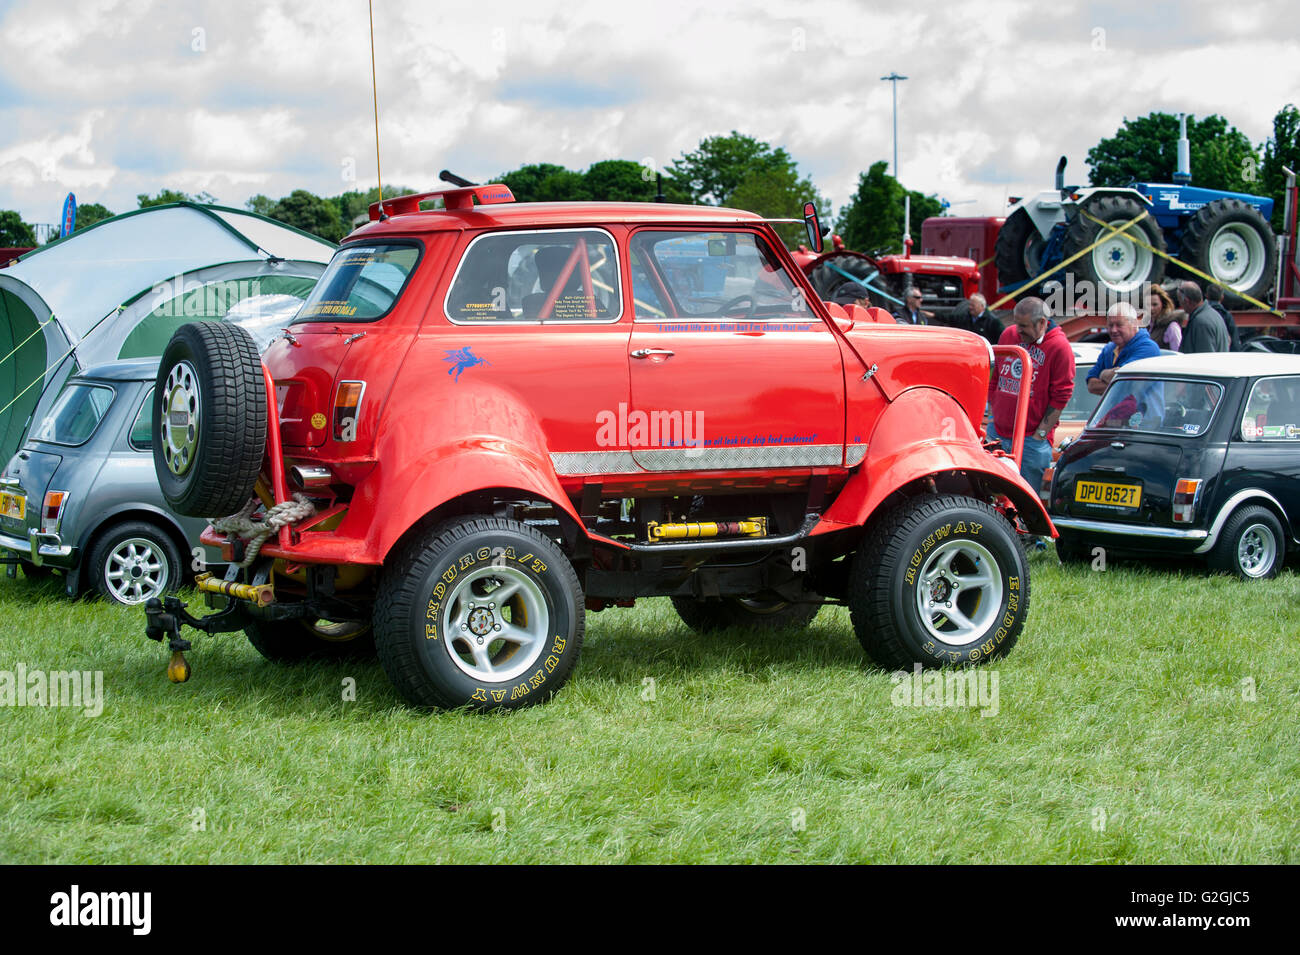 A "Monster Truck Style" Mini Minor car on show at a summer fair in the UK Stock Photo